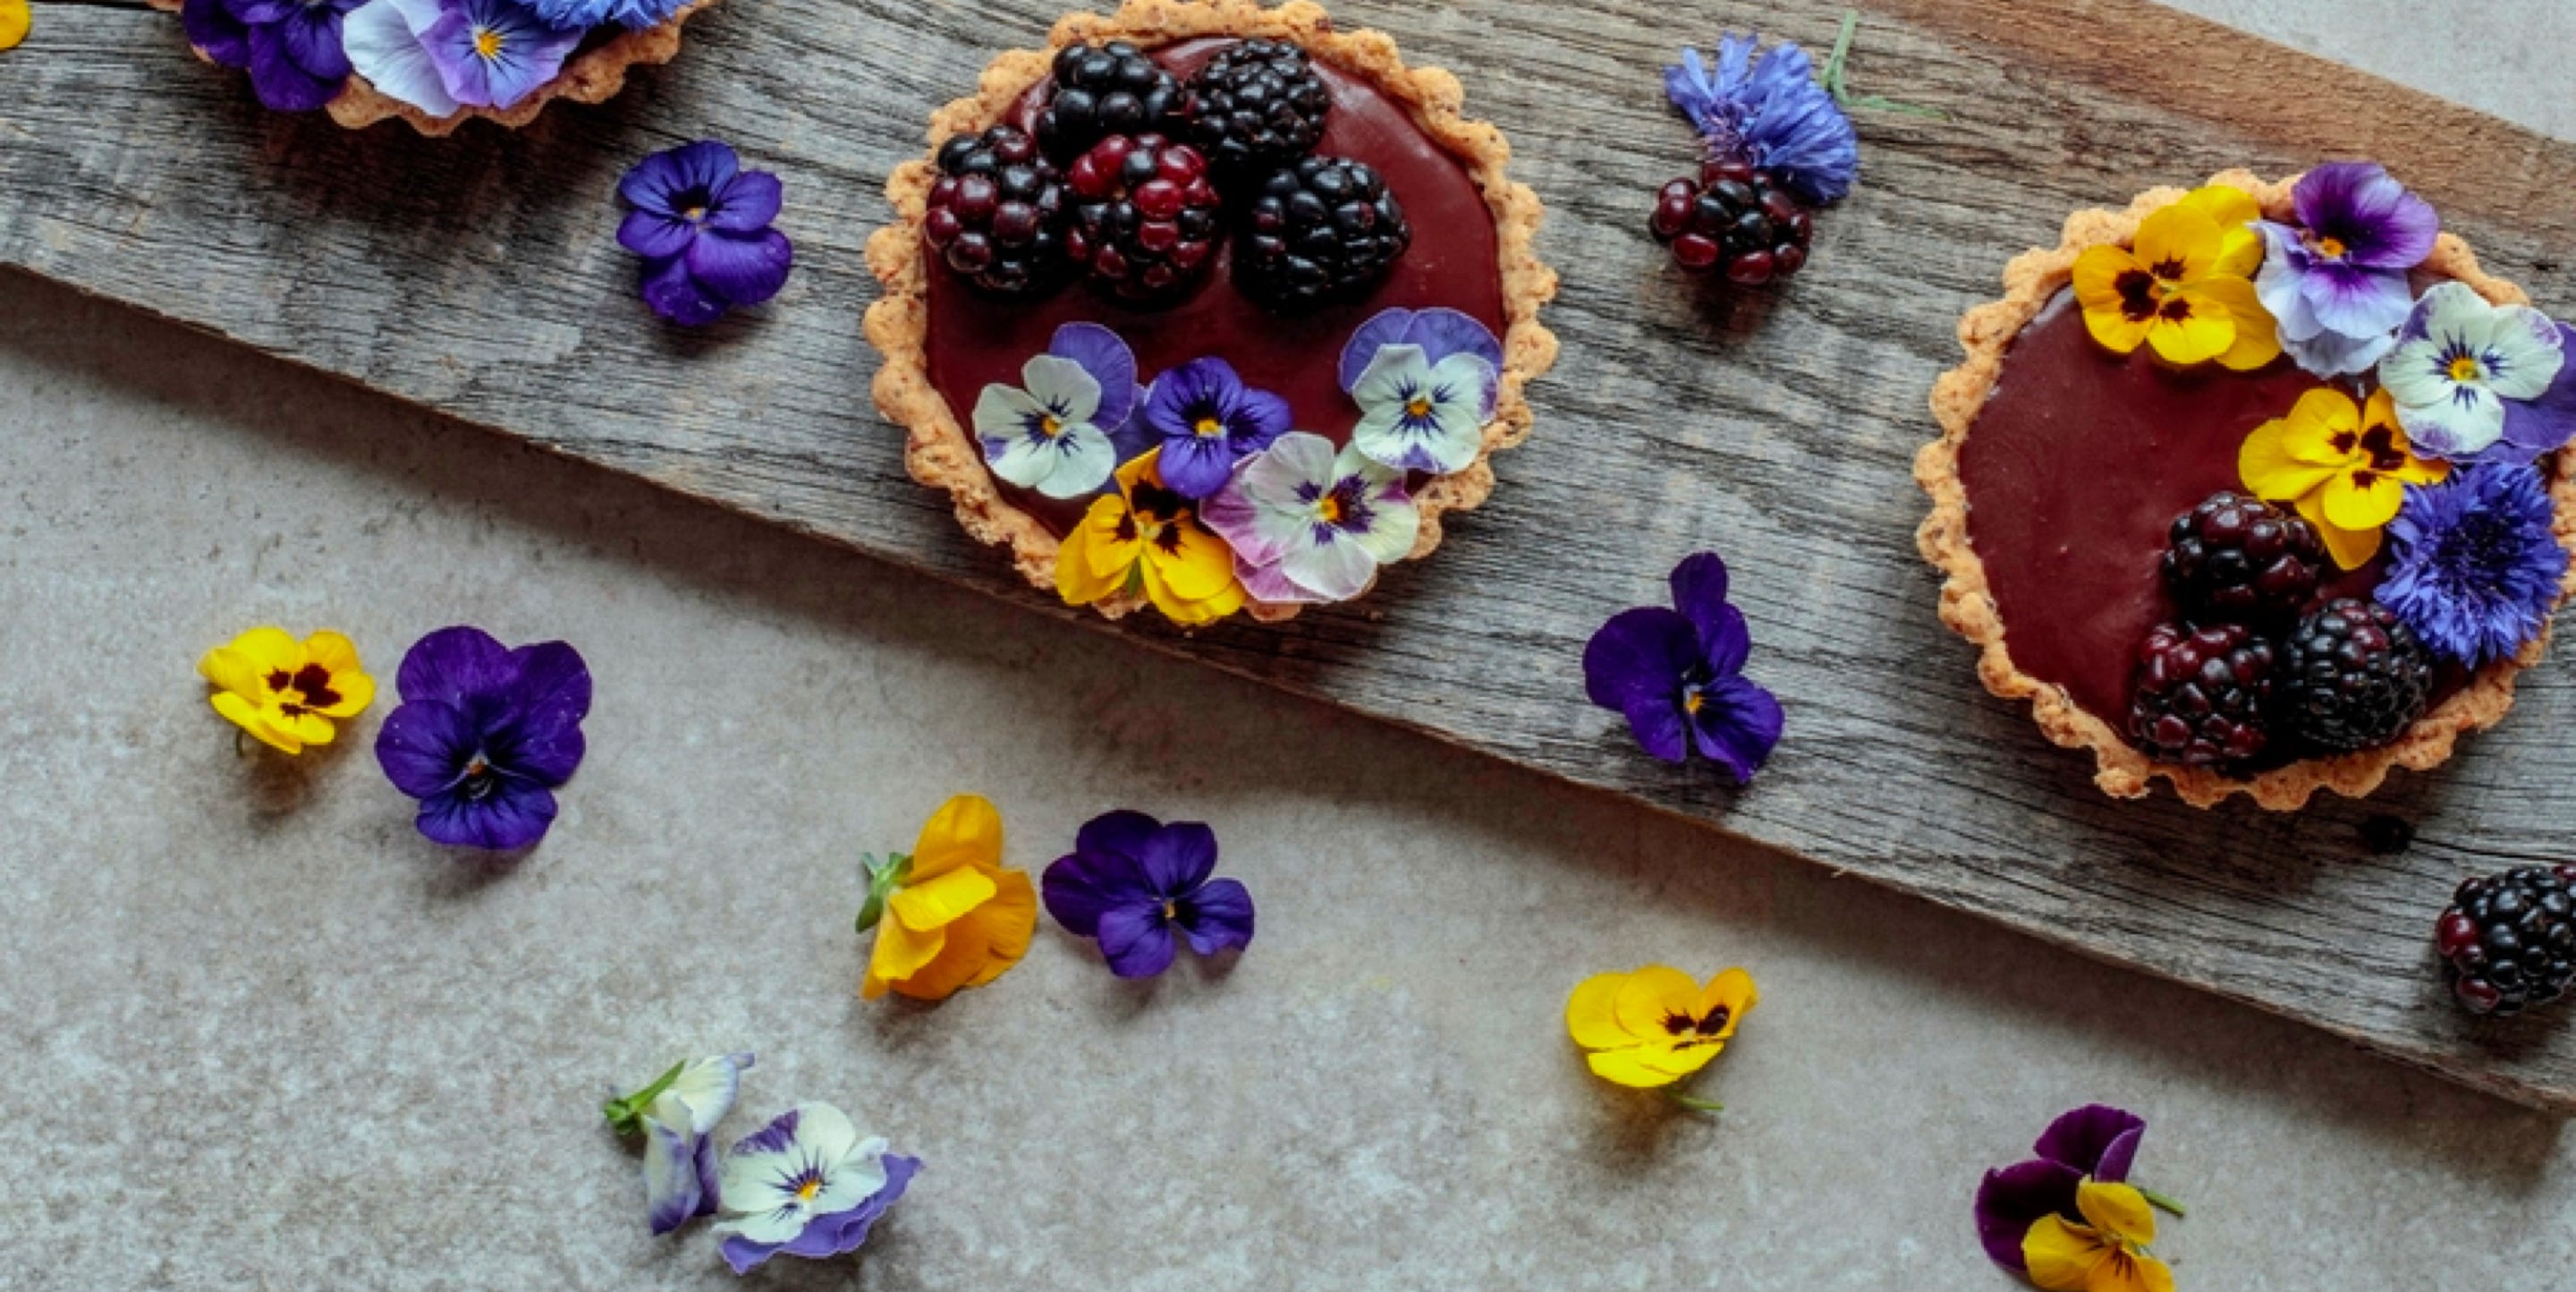 Blackberry tarts with floral decoration